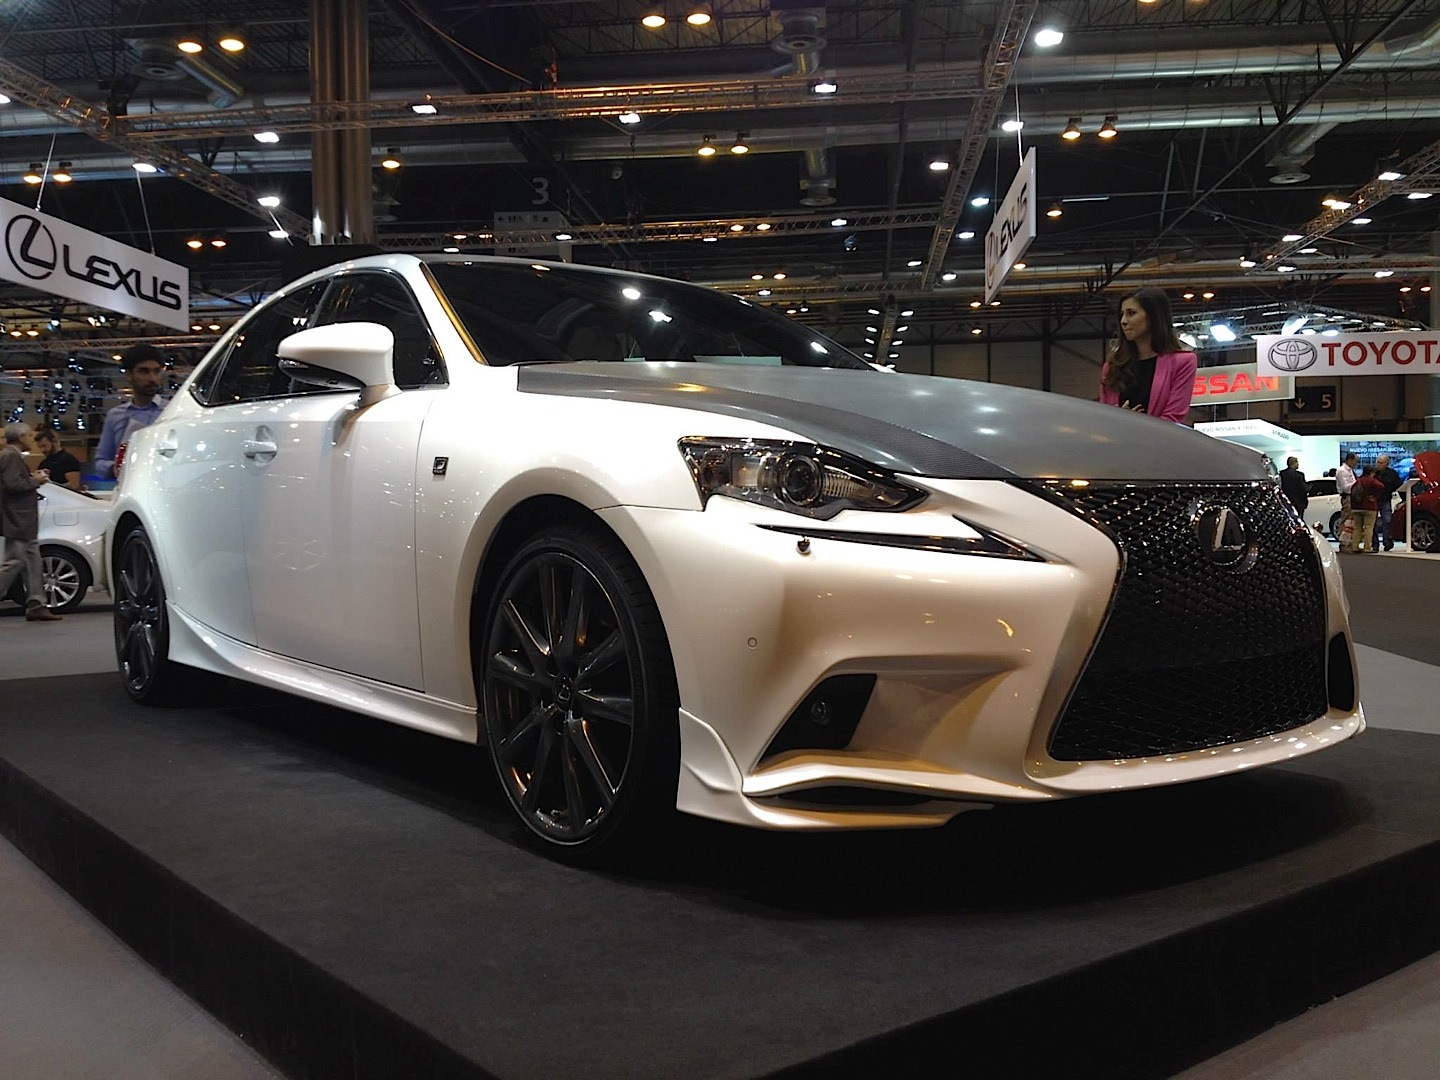 Th Anniversary Edition Lexus Is F Sport And New Rc F Rims Debut In